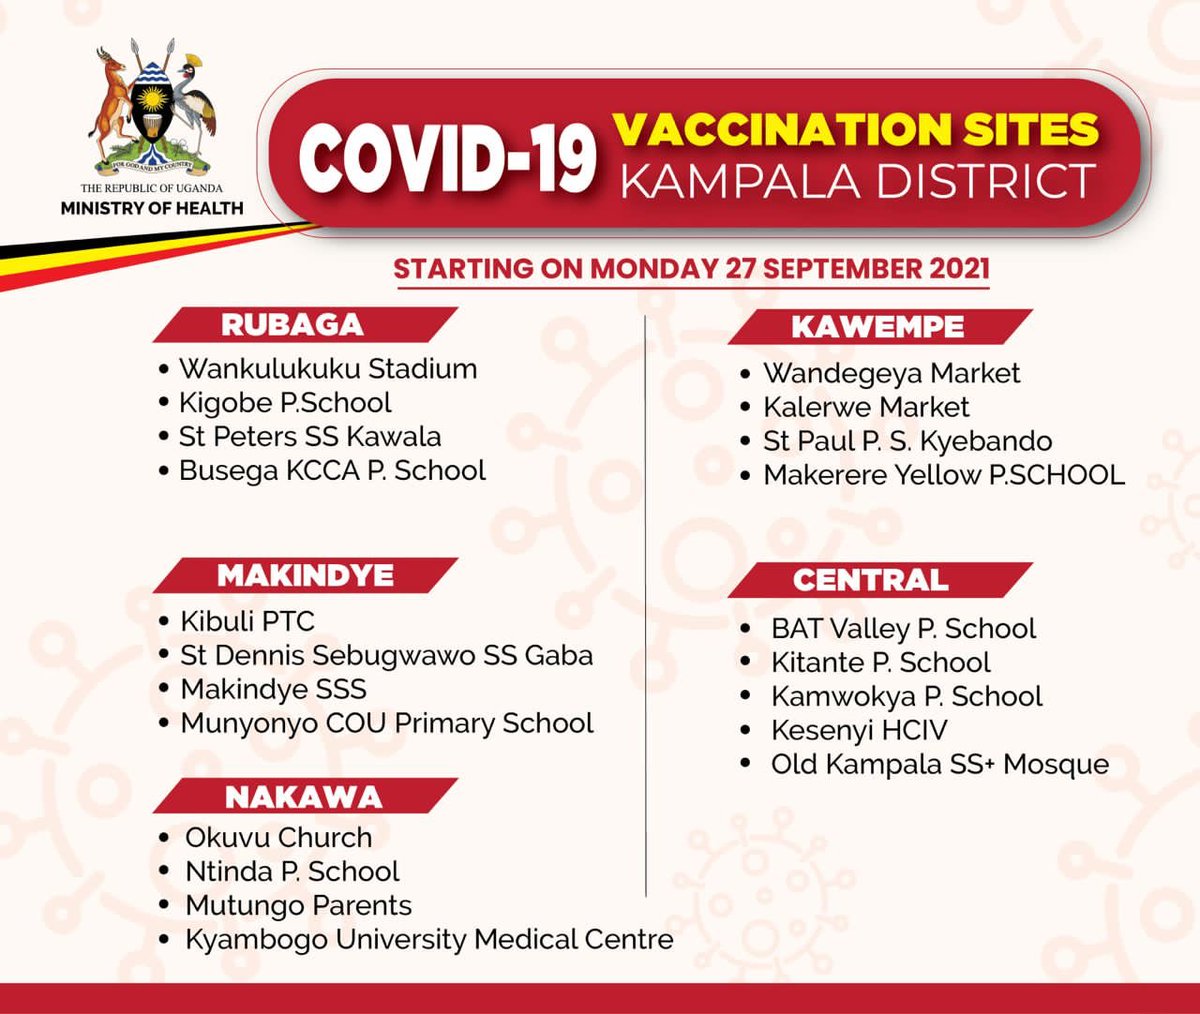 Get your jab today so that we can get closer to normal life. #kijjakuggwa #Covid19ug